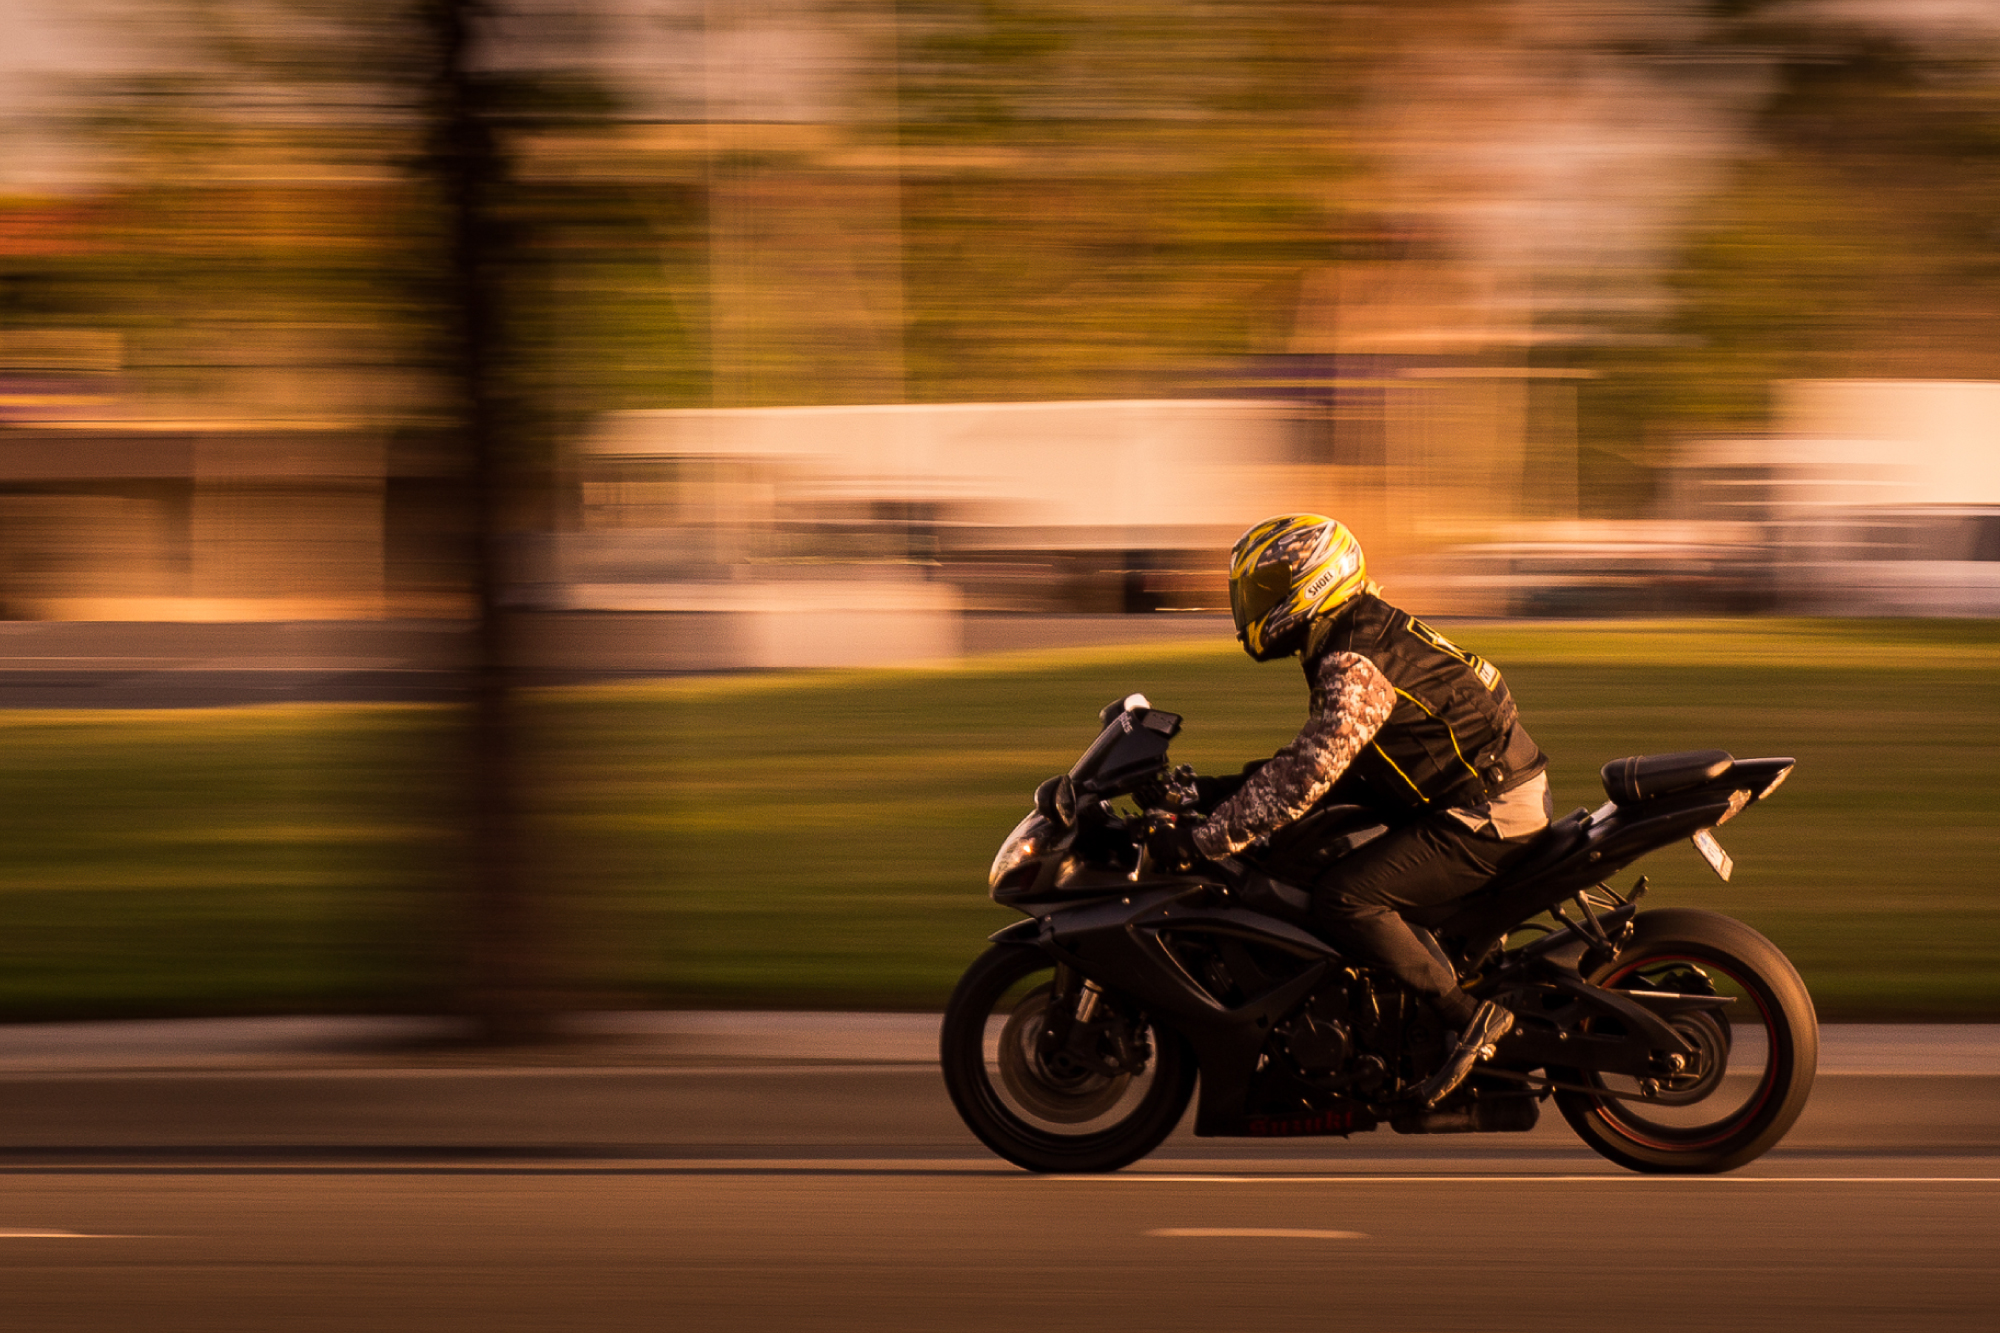 How to Hold a Camera and Panning Tutorial - SLR Lounge